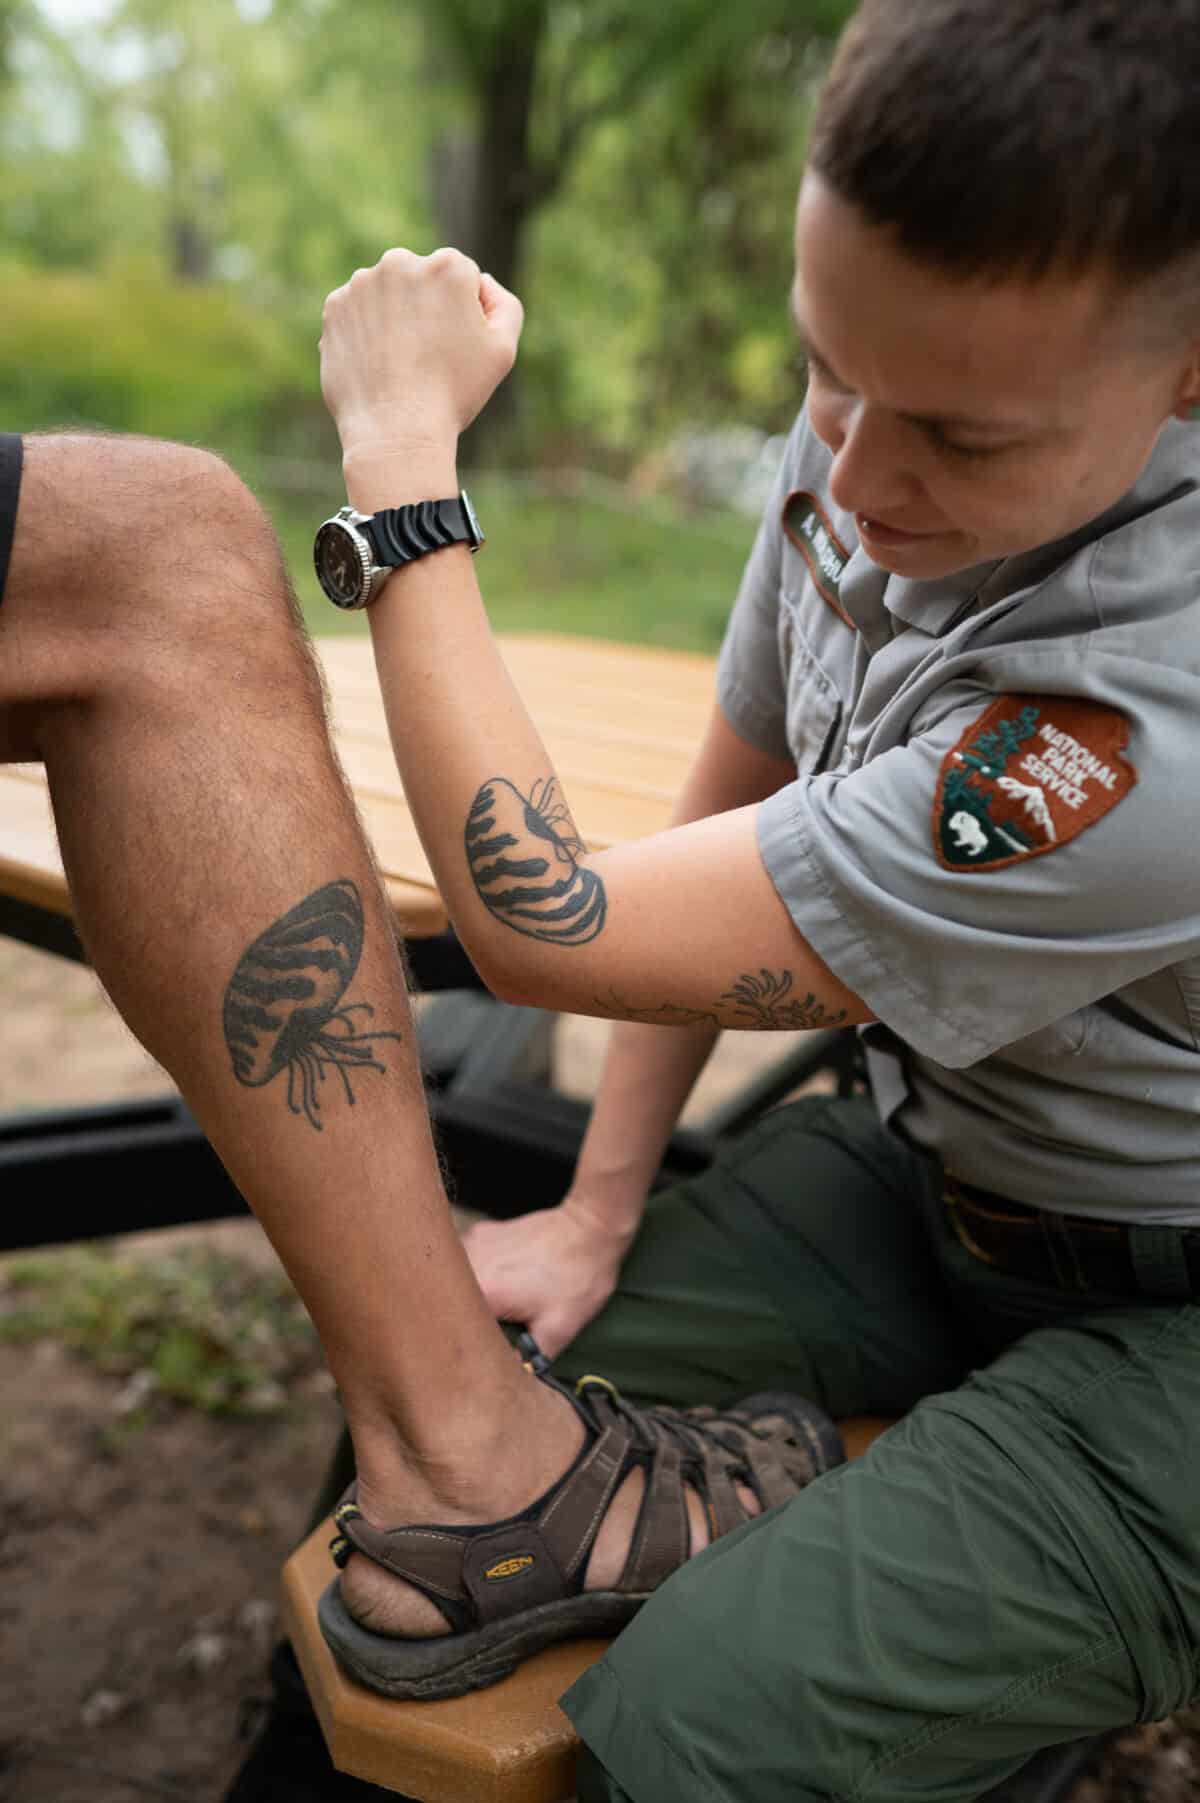 Byron Karns, 63, of Ely, MN, and Allie Holdhusen, 37, of Minneapolis, MN, show off their tattoos of zebra mussels on September 11, 2023 in Taylors Falls, MN. The original drawings were done by Holdhusen.